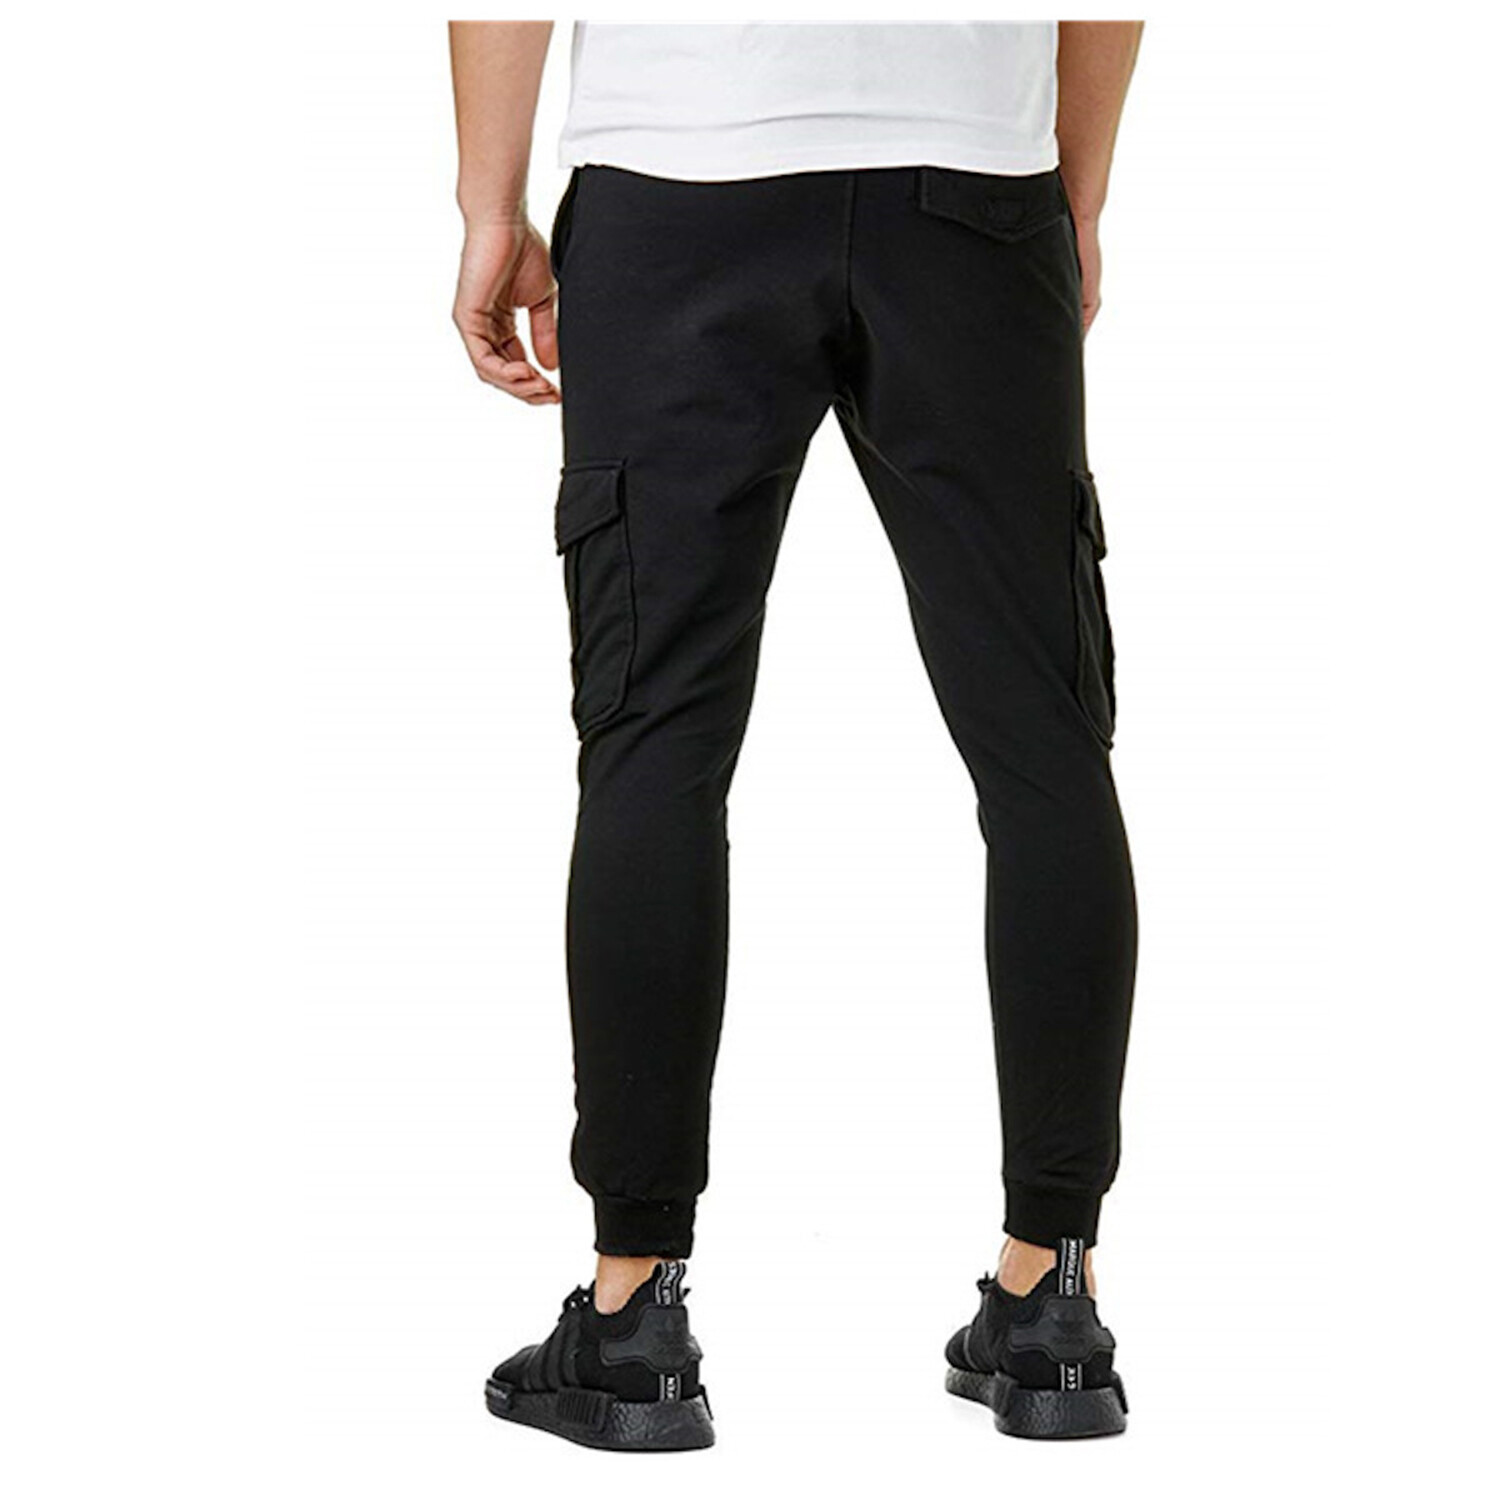 Warwick Joggers // Black (XL) - Pants & Shorts Clearance - Touch of Modern